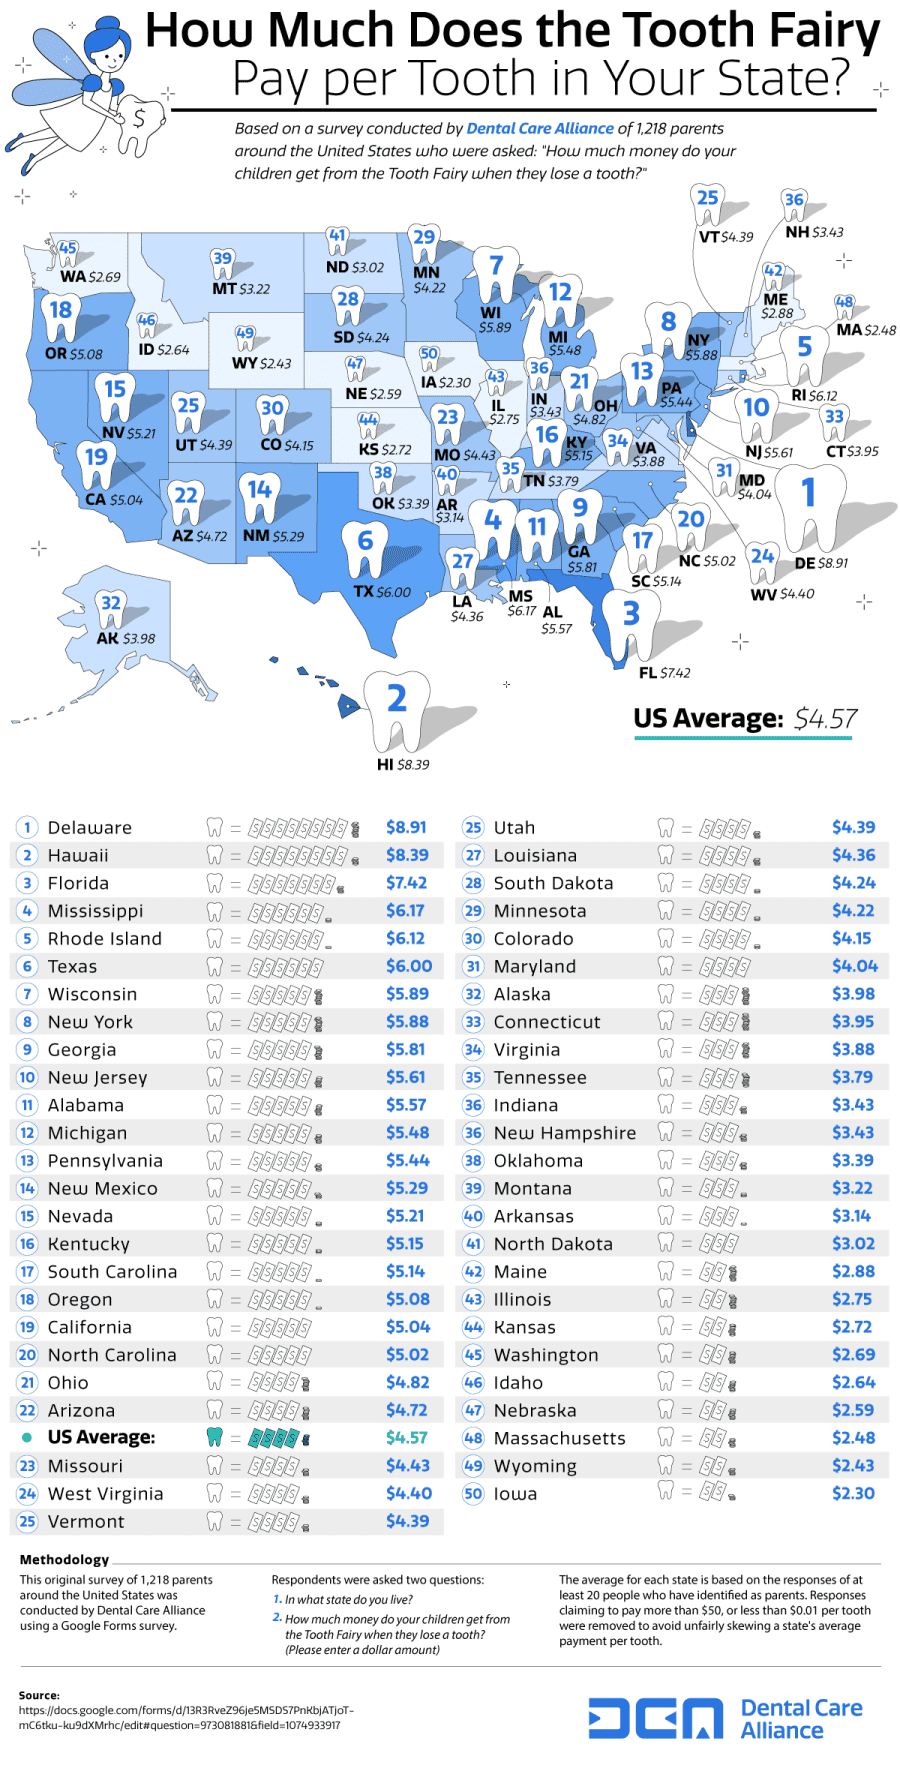 tooth-fairy-pay-per-tooth-by-state-Infographic